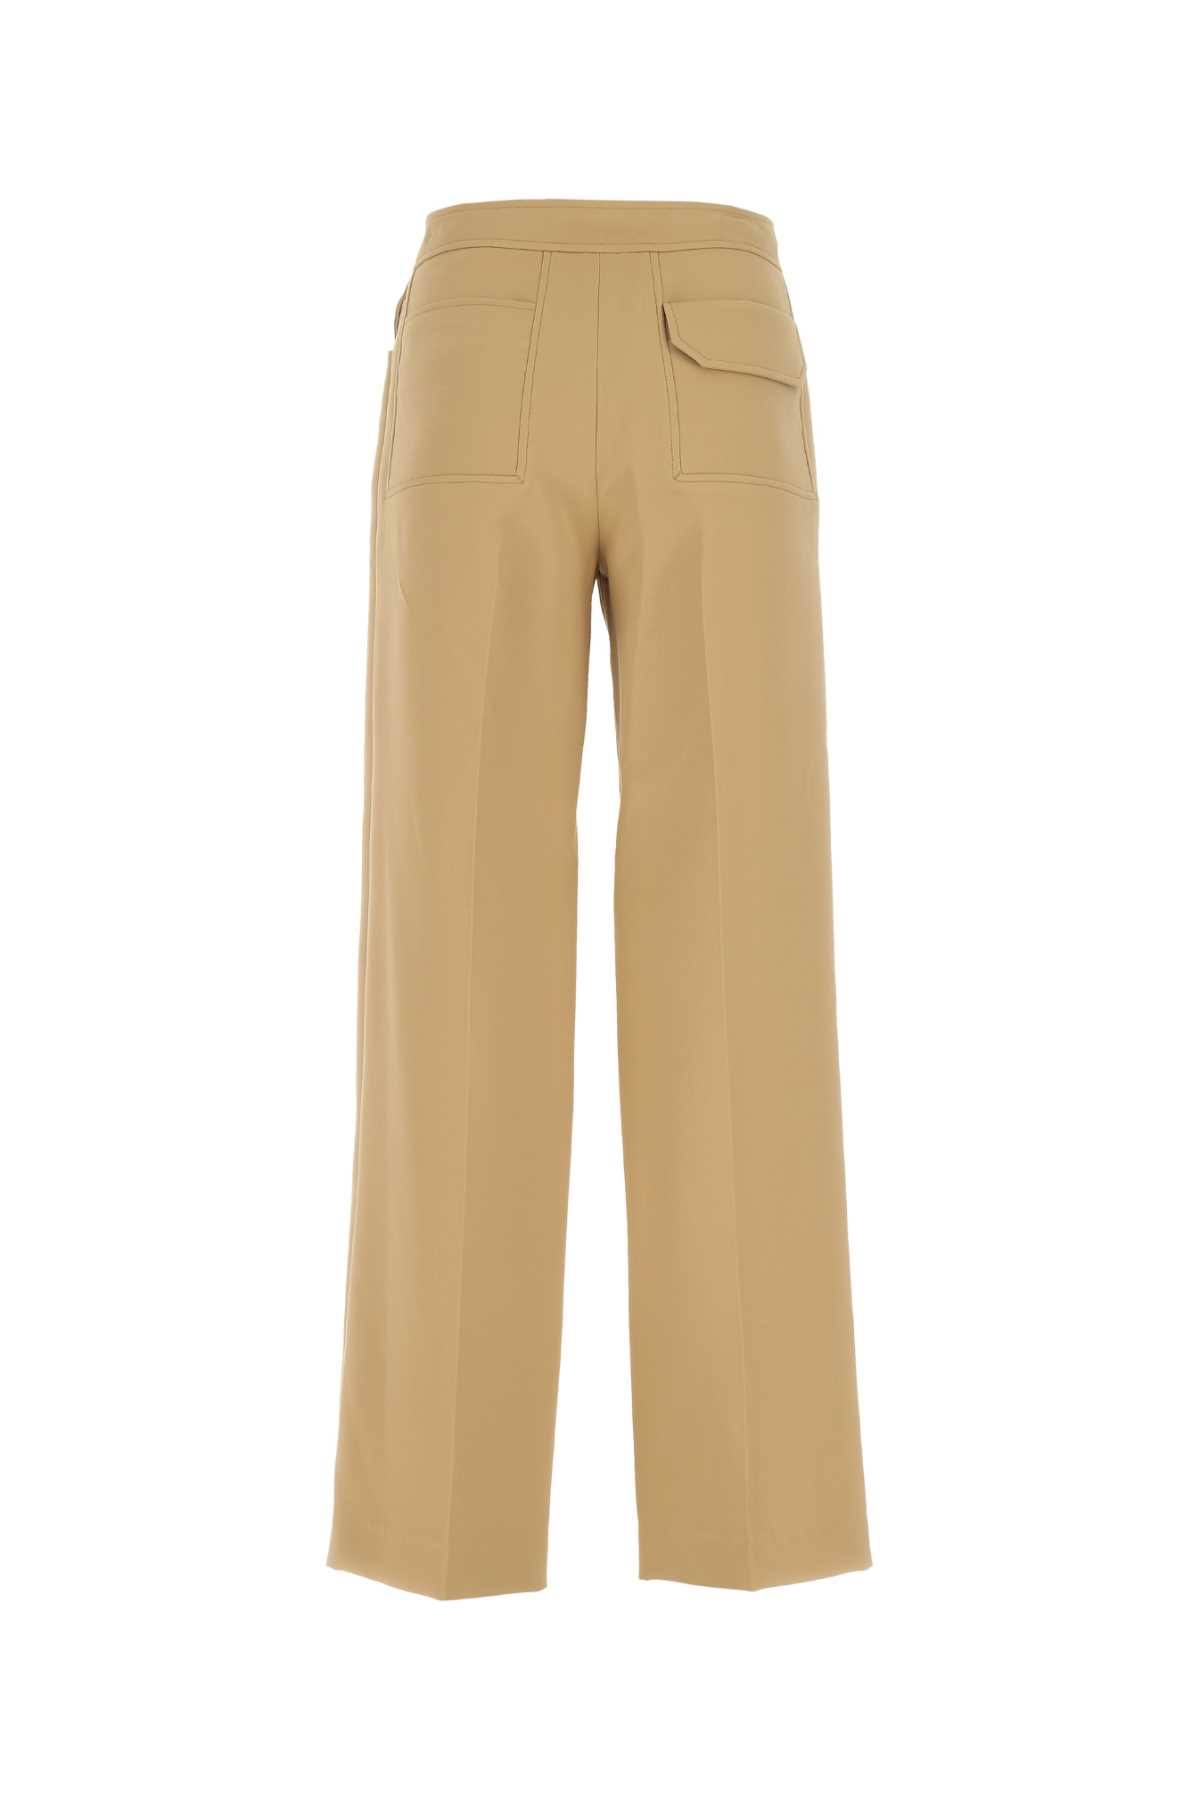 Low Classic Camel Polyester Wide-leg Trouser In 0269